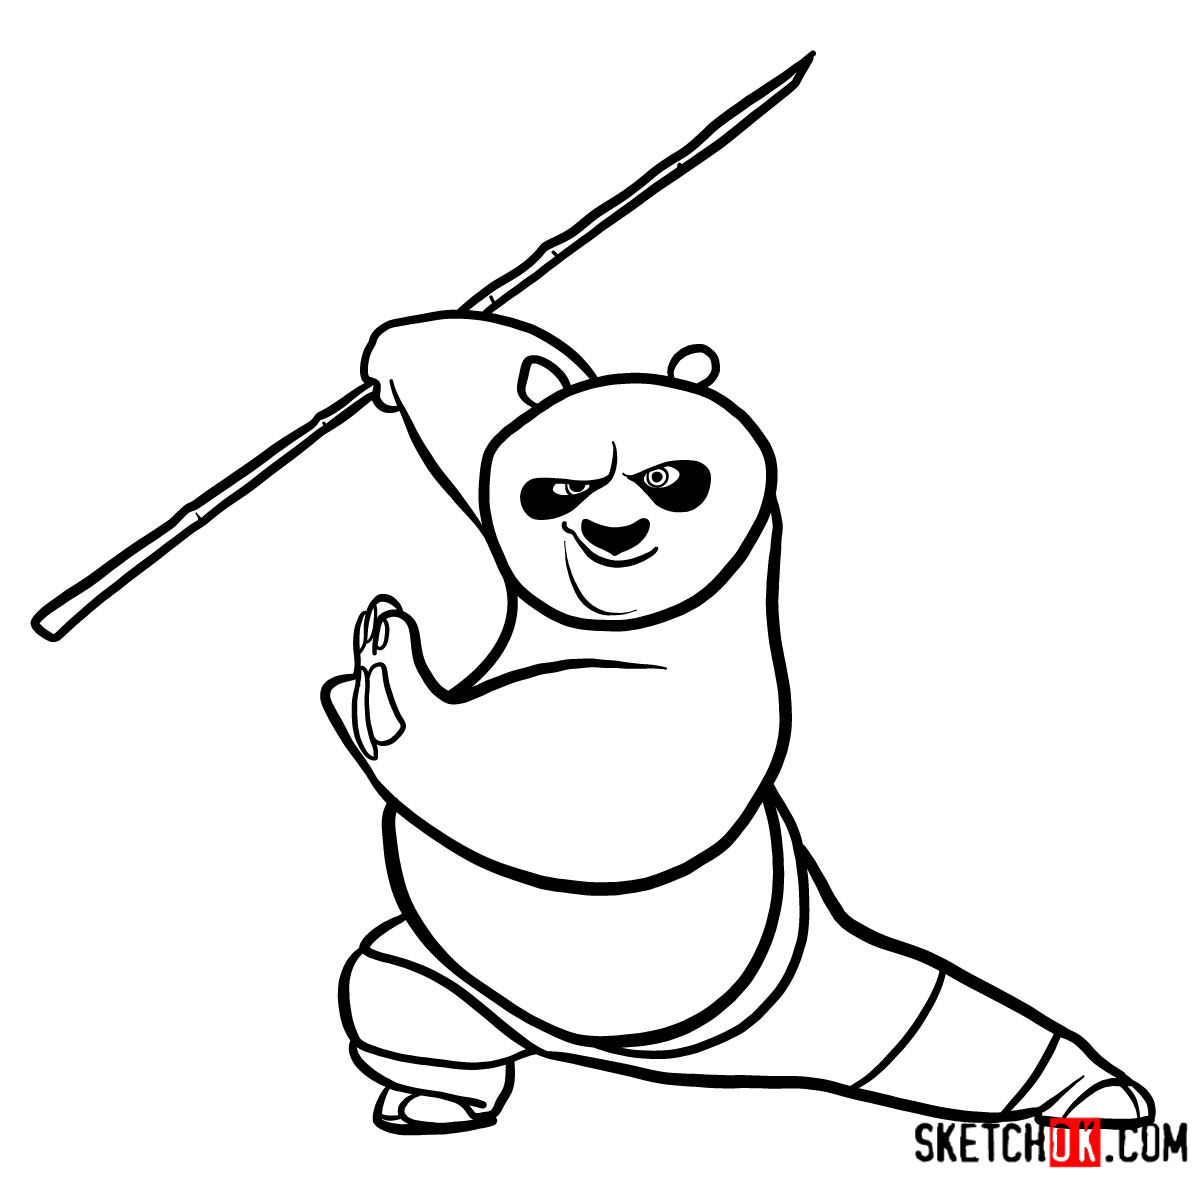 How to draw Po the Kung Fu Panda